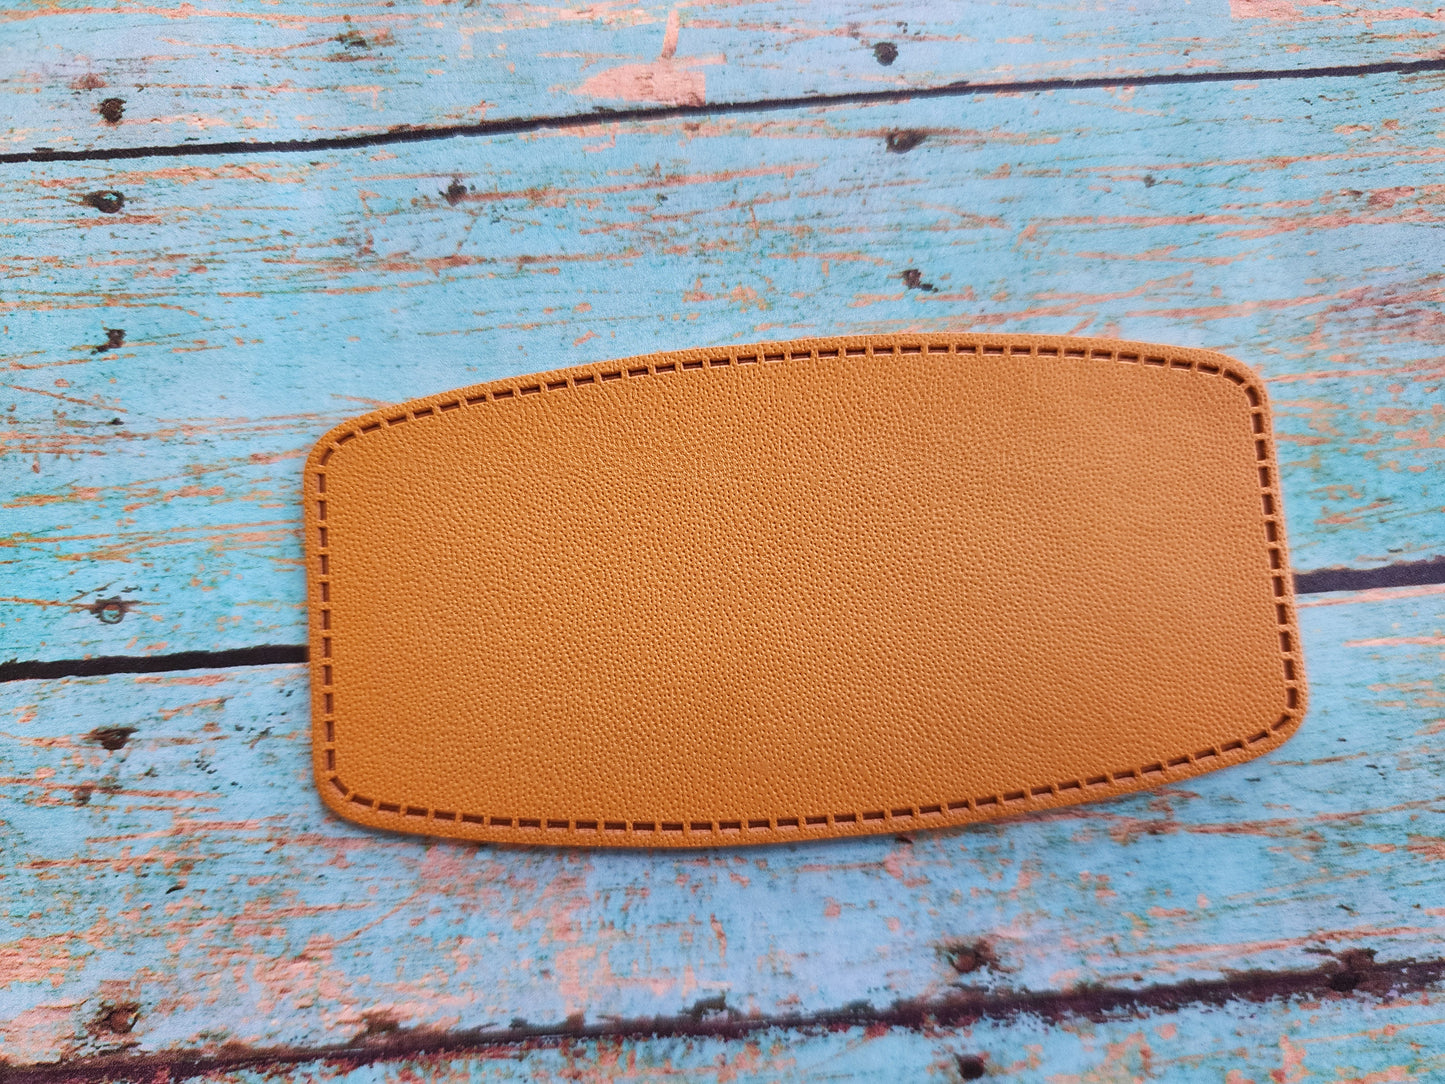 Retro Grey, Sandstone or Tan Leather Hat Patch Sublimation Blank! Rounded Corner Rectangle! Laserable!